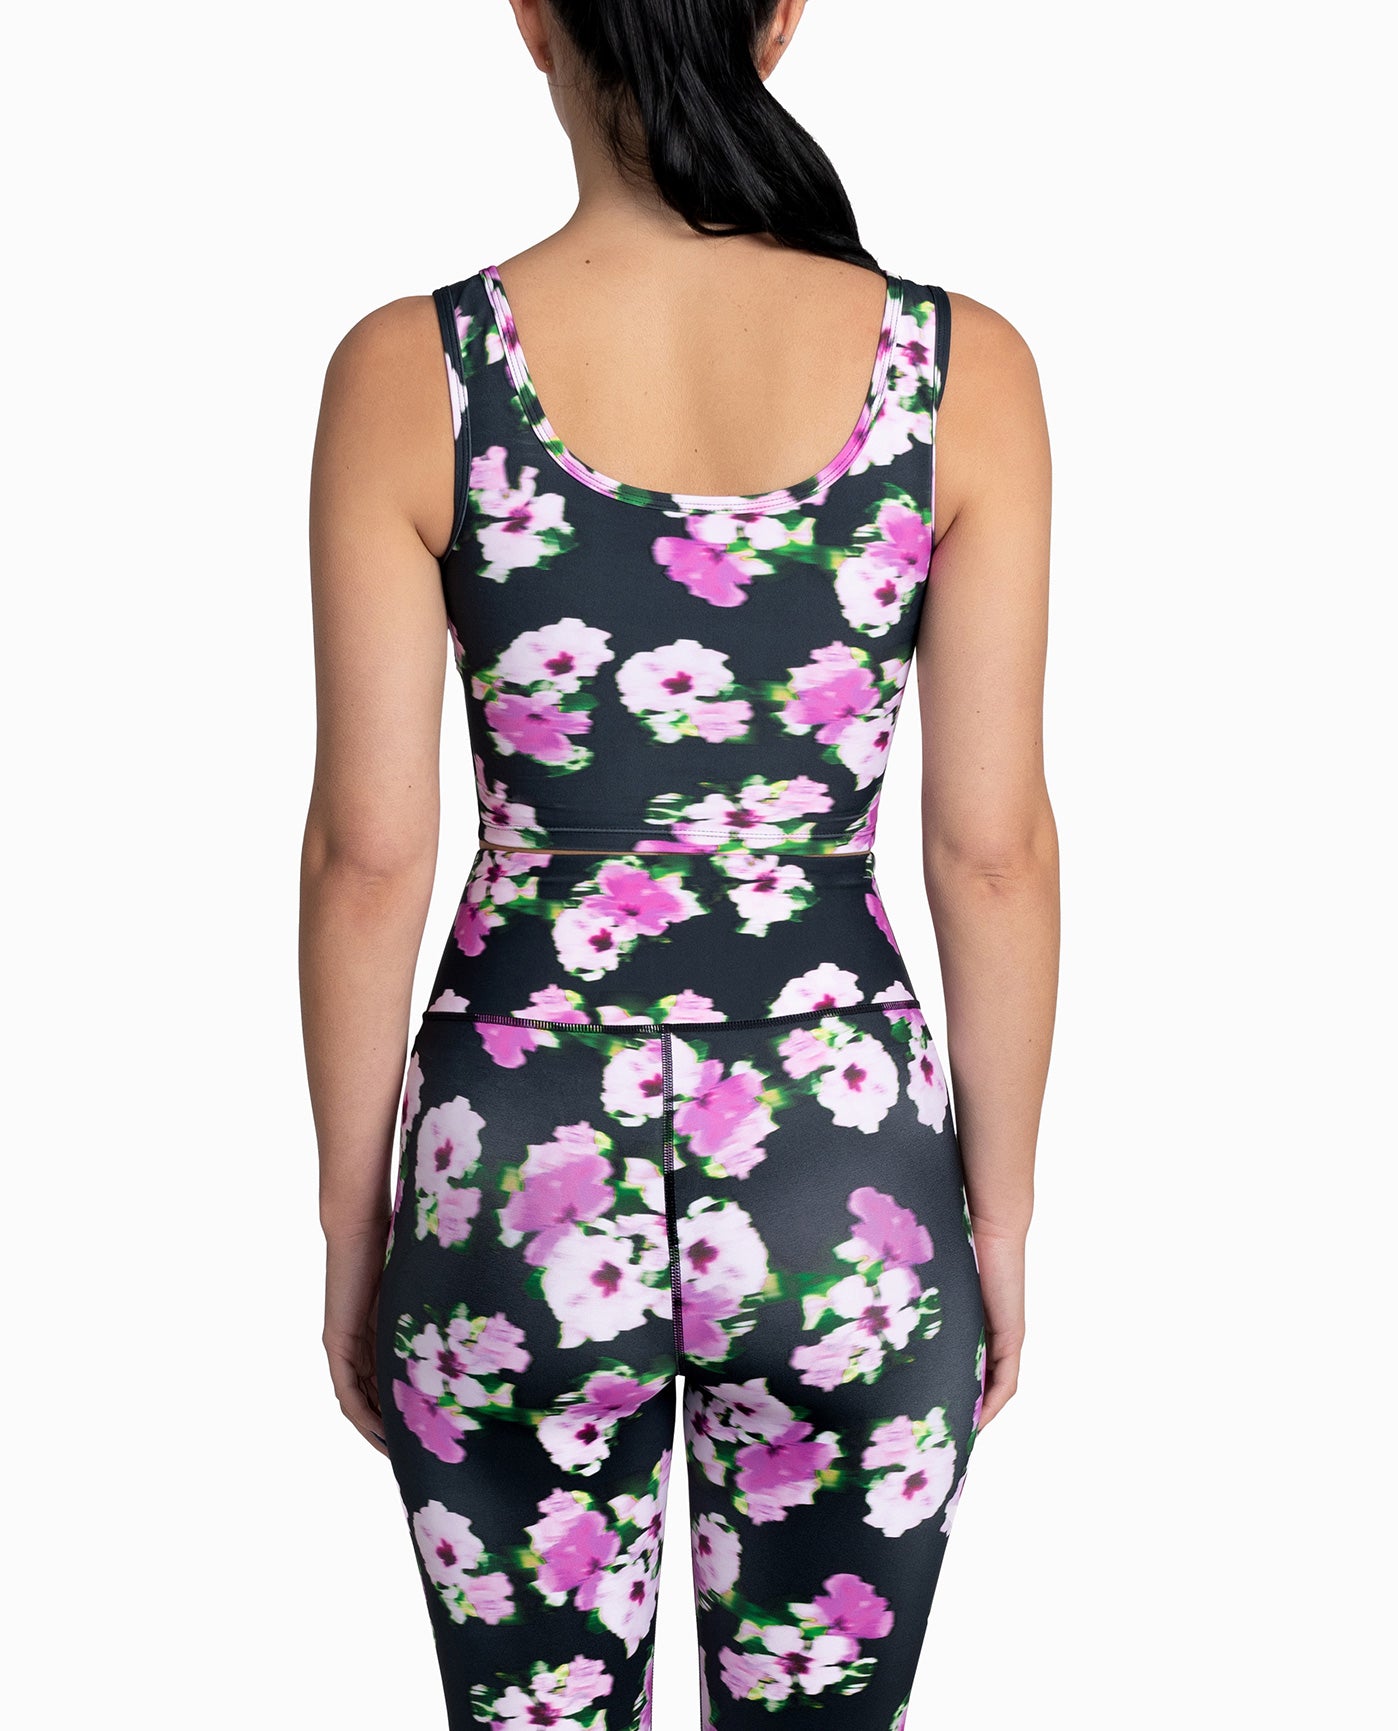 BACK OF SPORTS BRA TOP | Pink and Black Floral